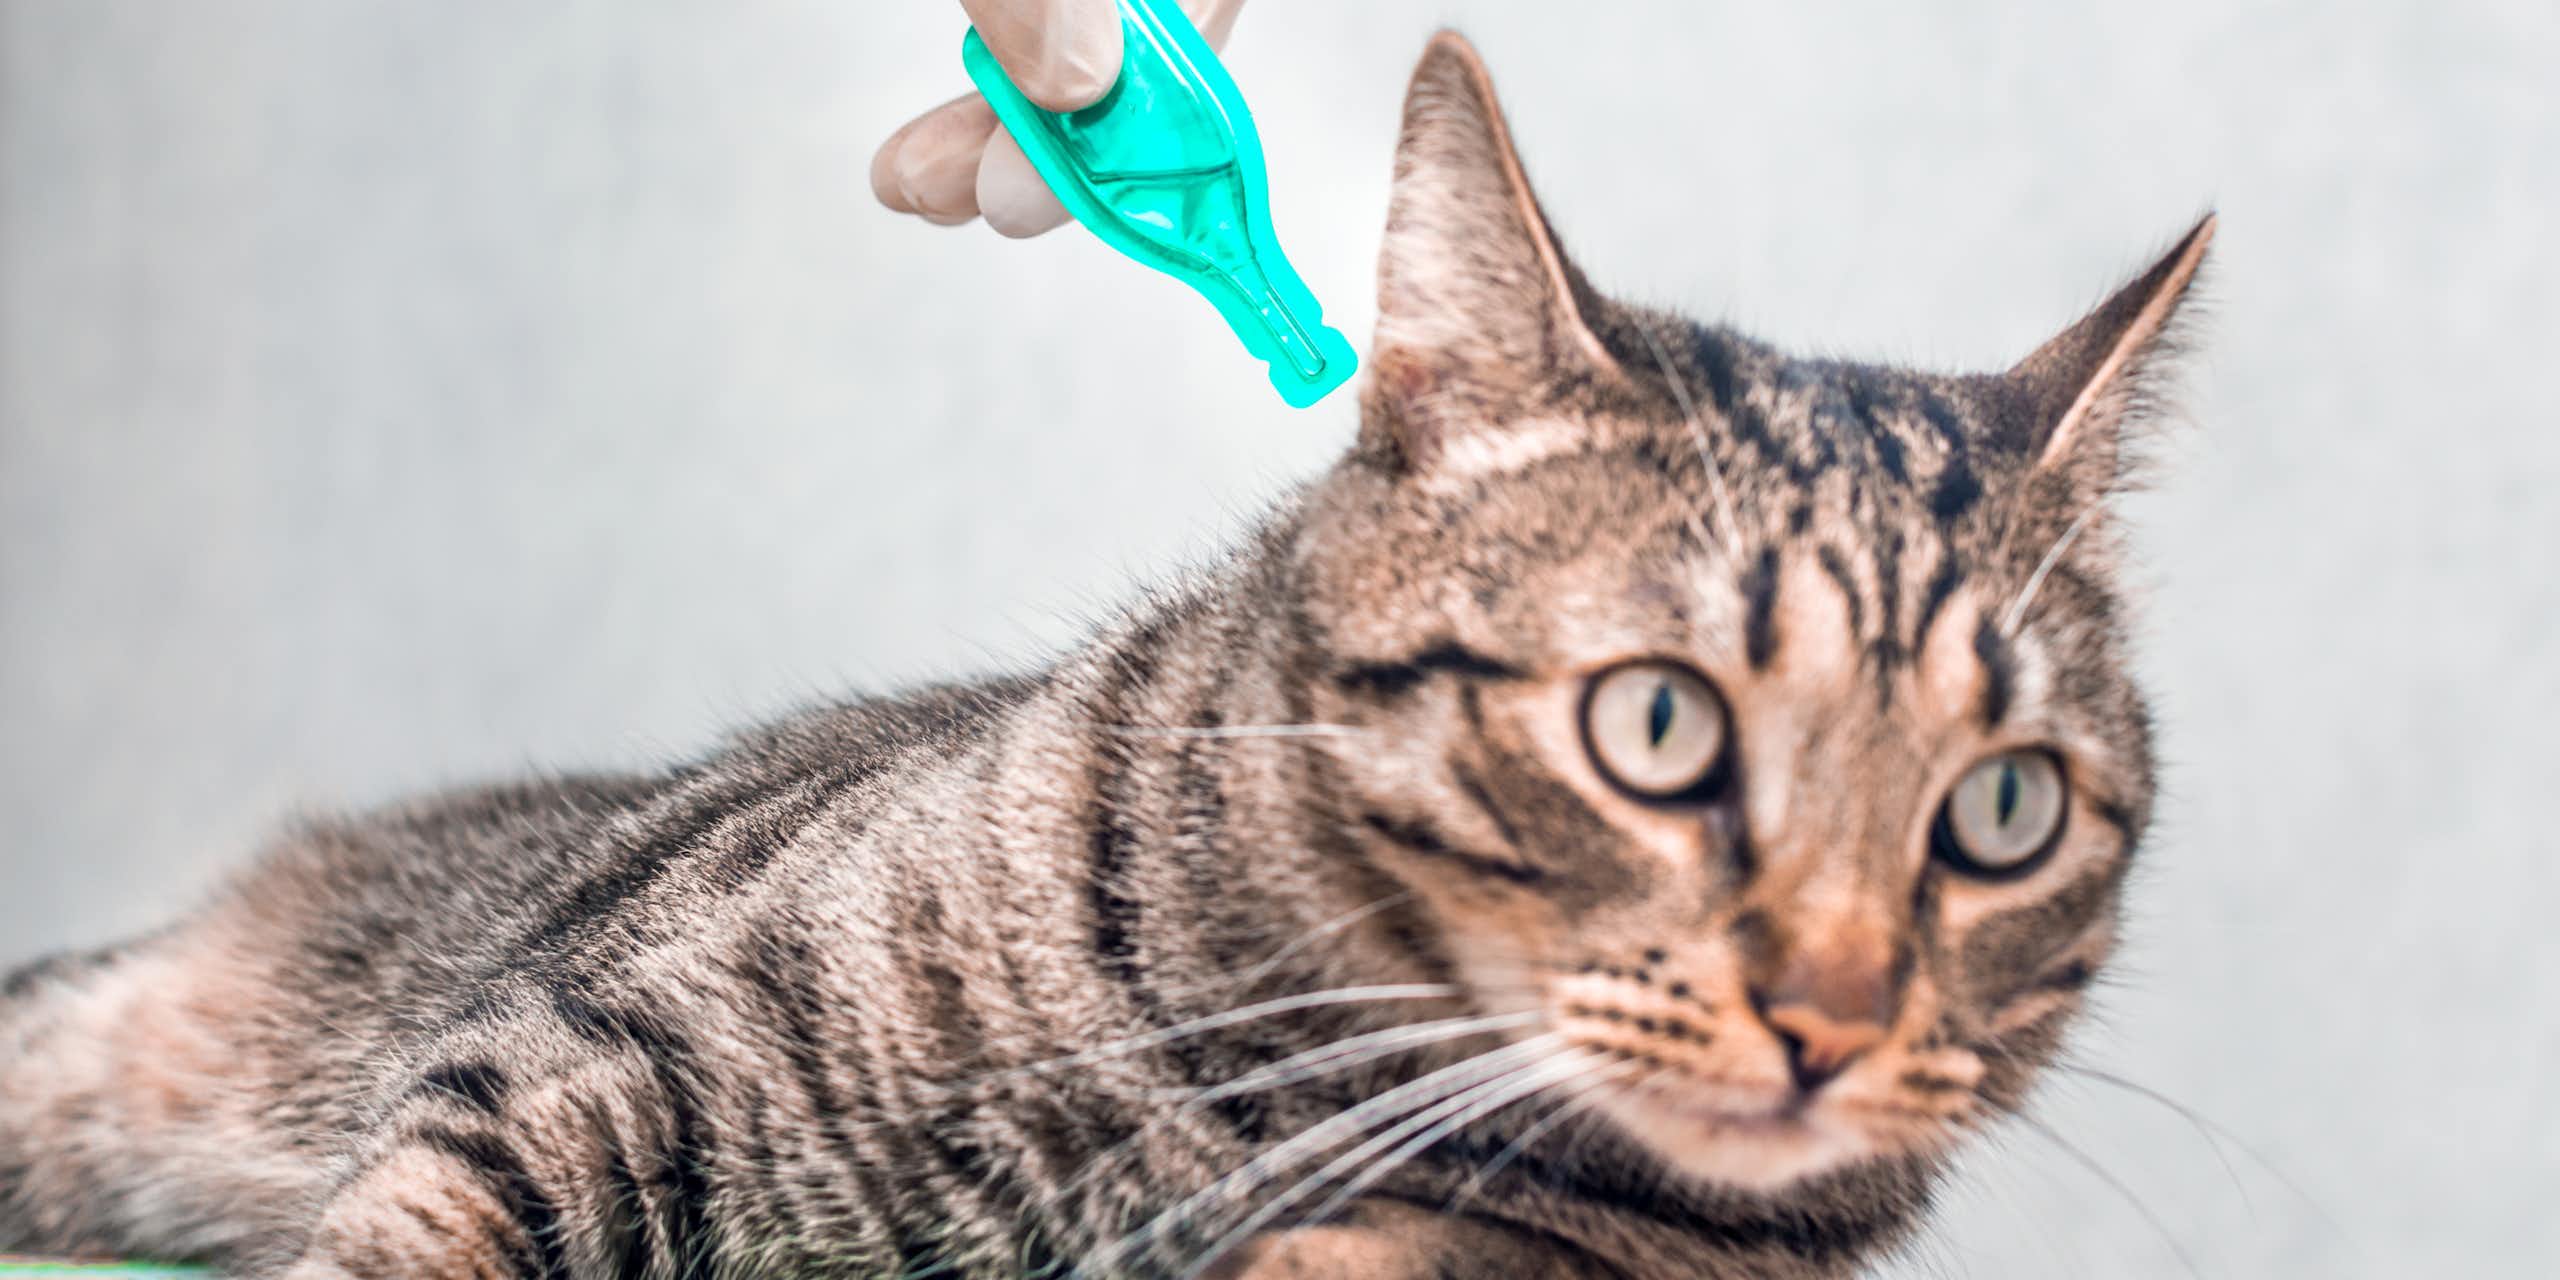 tabby cat close up of head, gloved human hand applying tick treatment using bright green drop sachet to cat's neck, white background